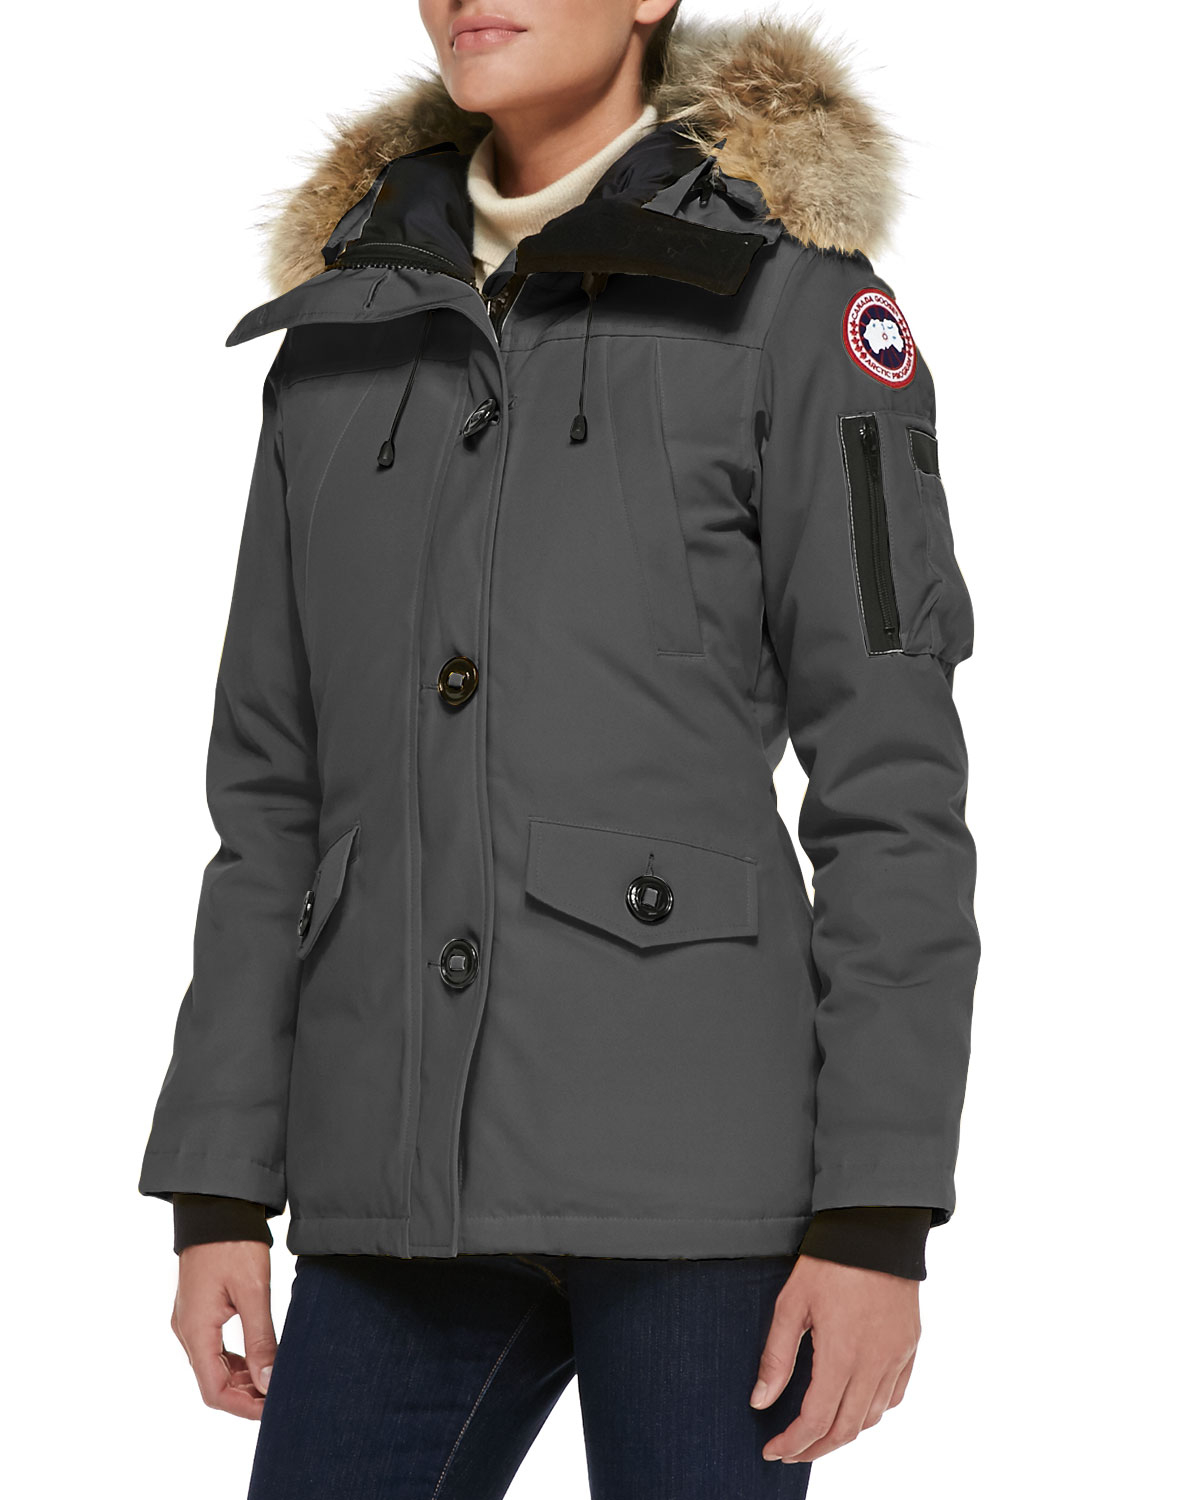 Special offer > canada goose montebello parka black, Up to 73% OFF